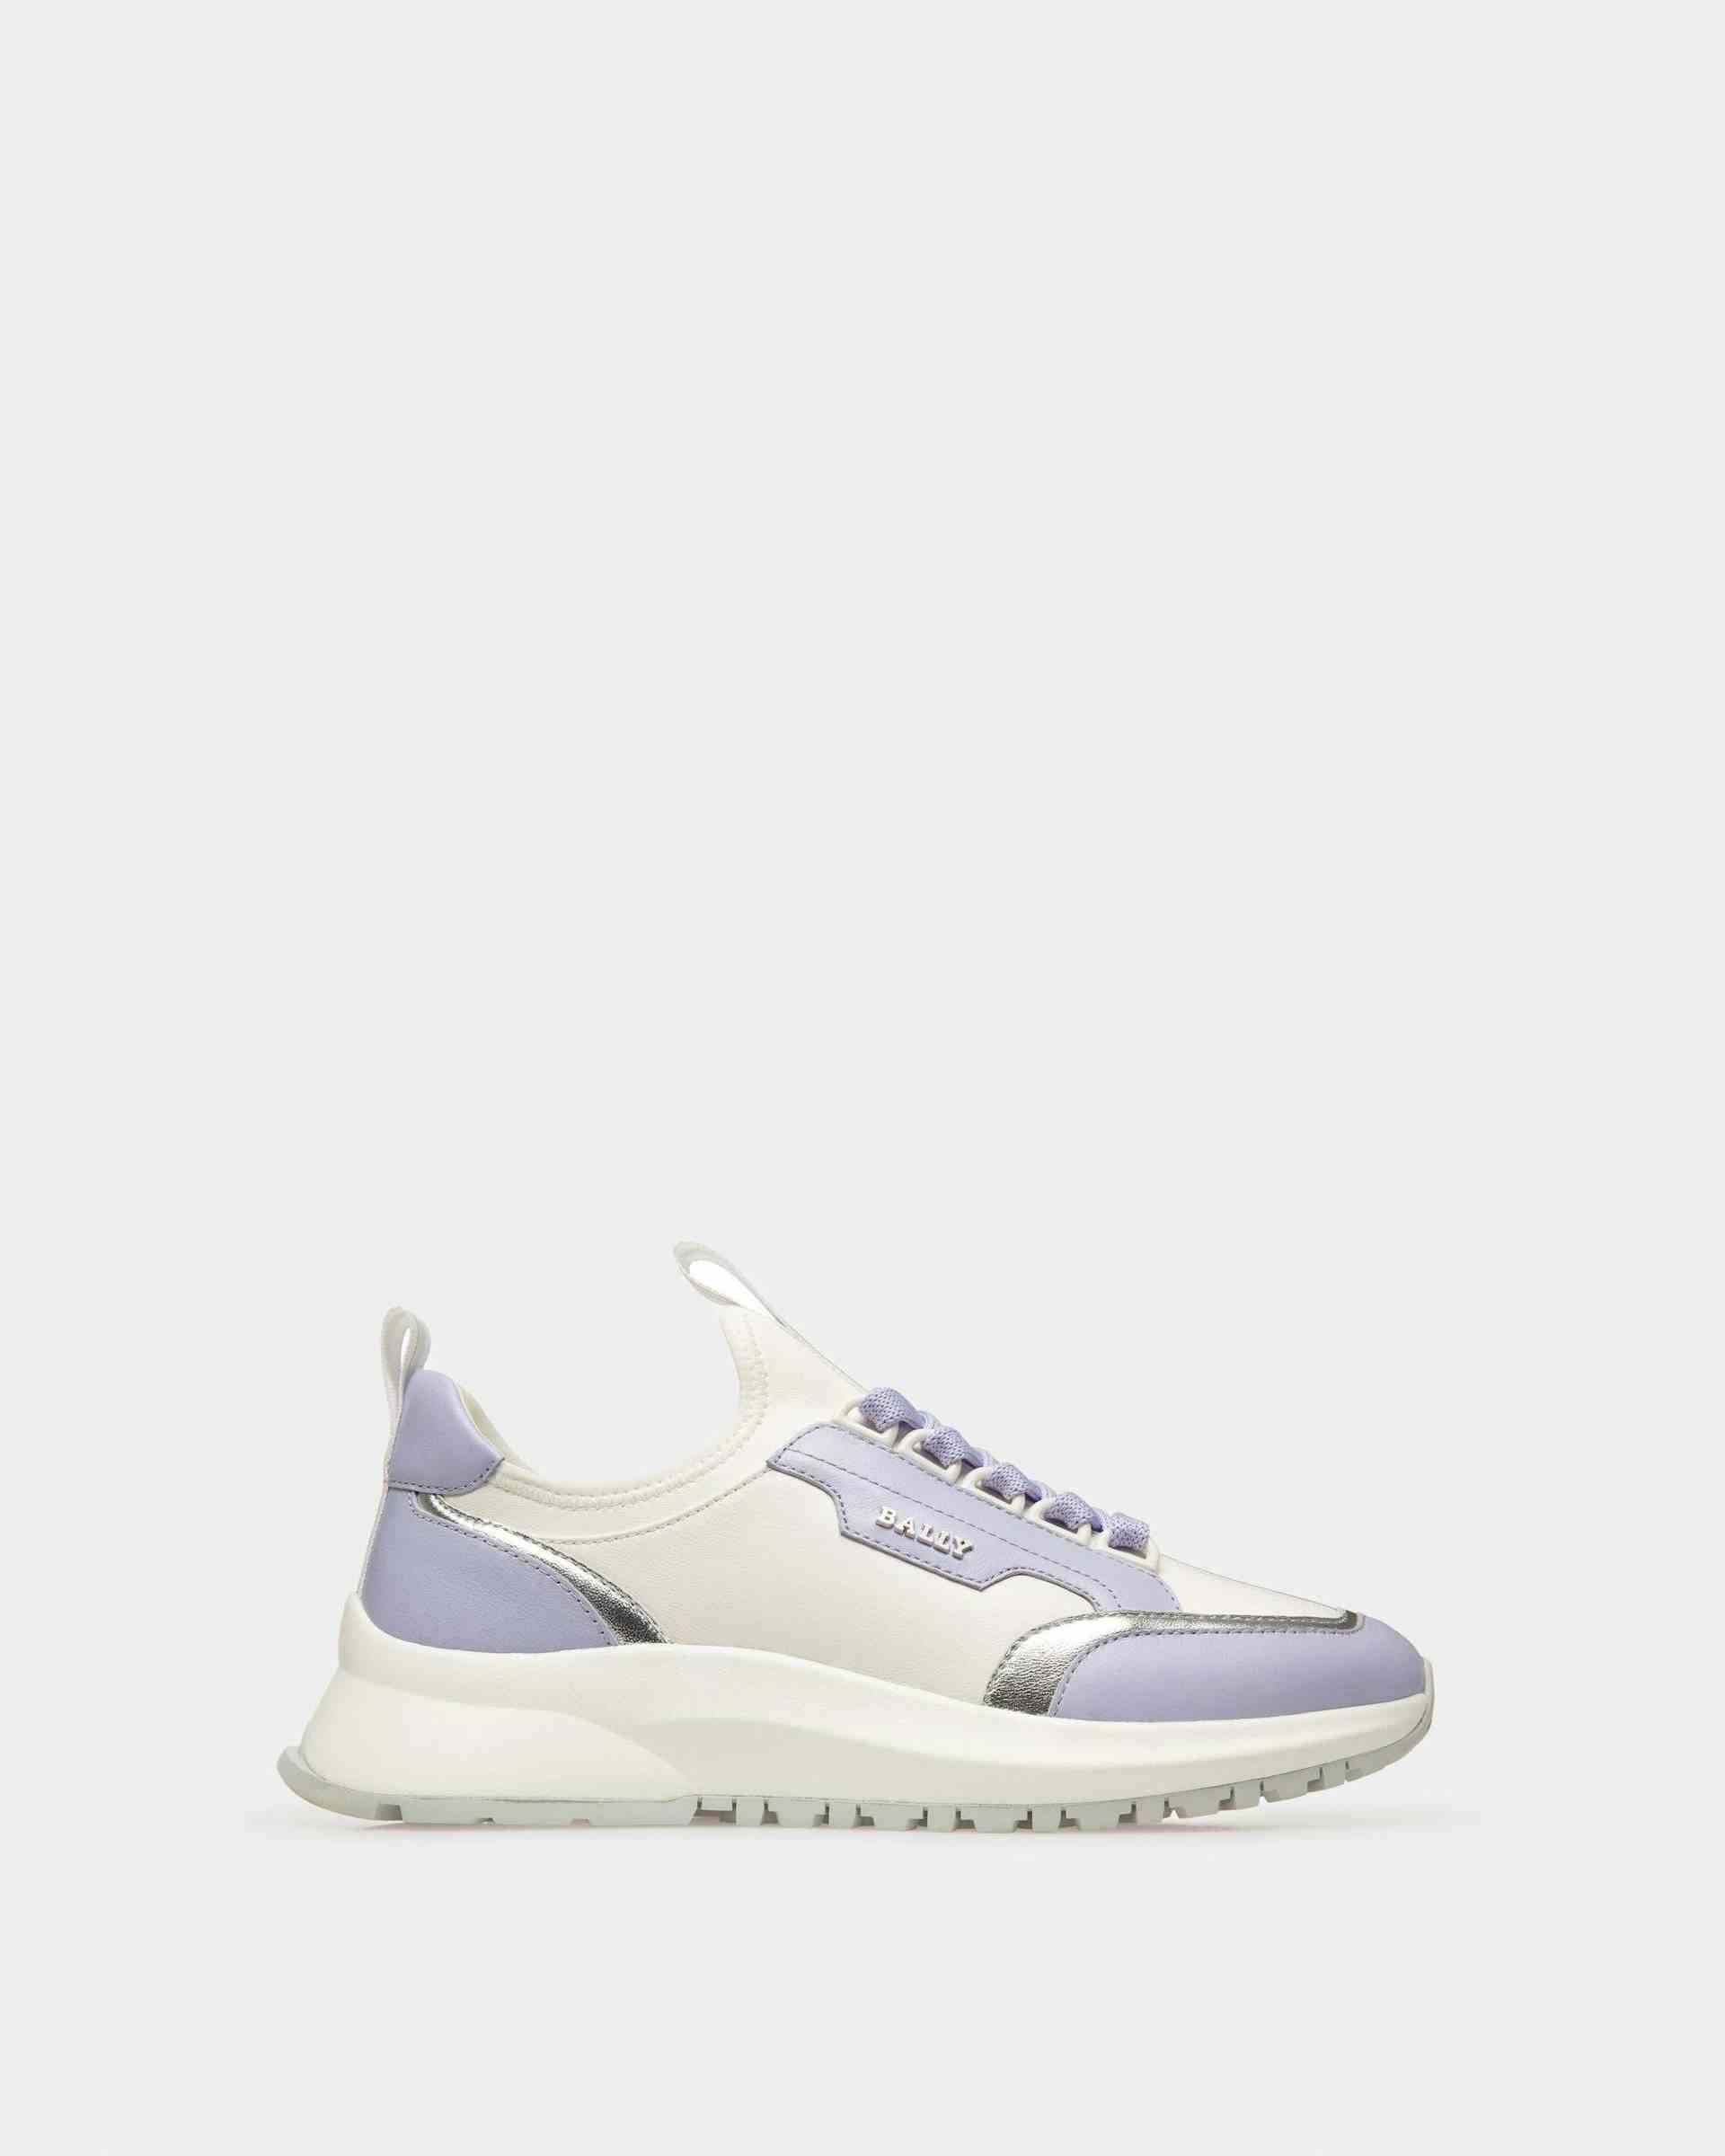 Deven Leather Sneakers In White & Lilac - Women's - Bally